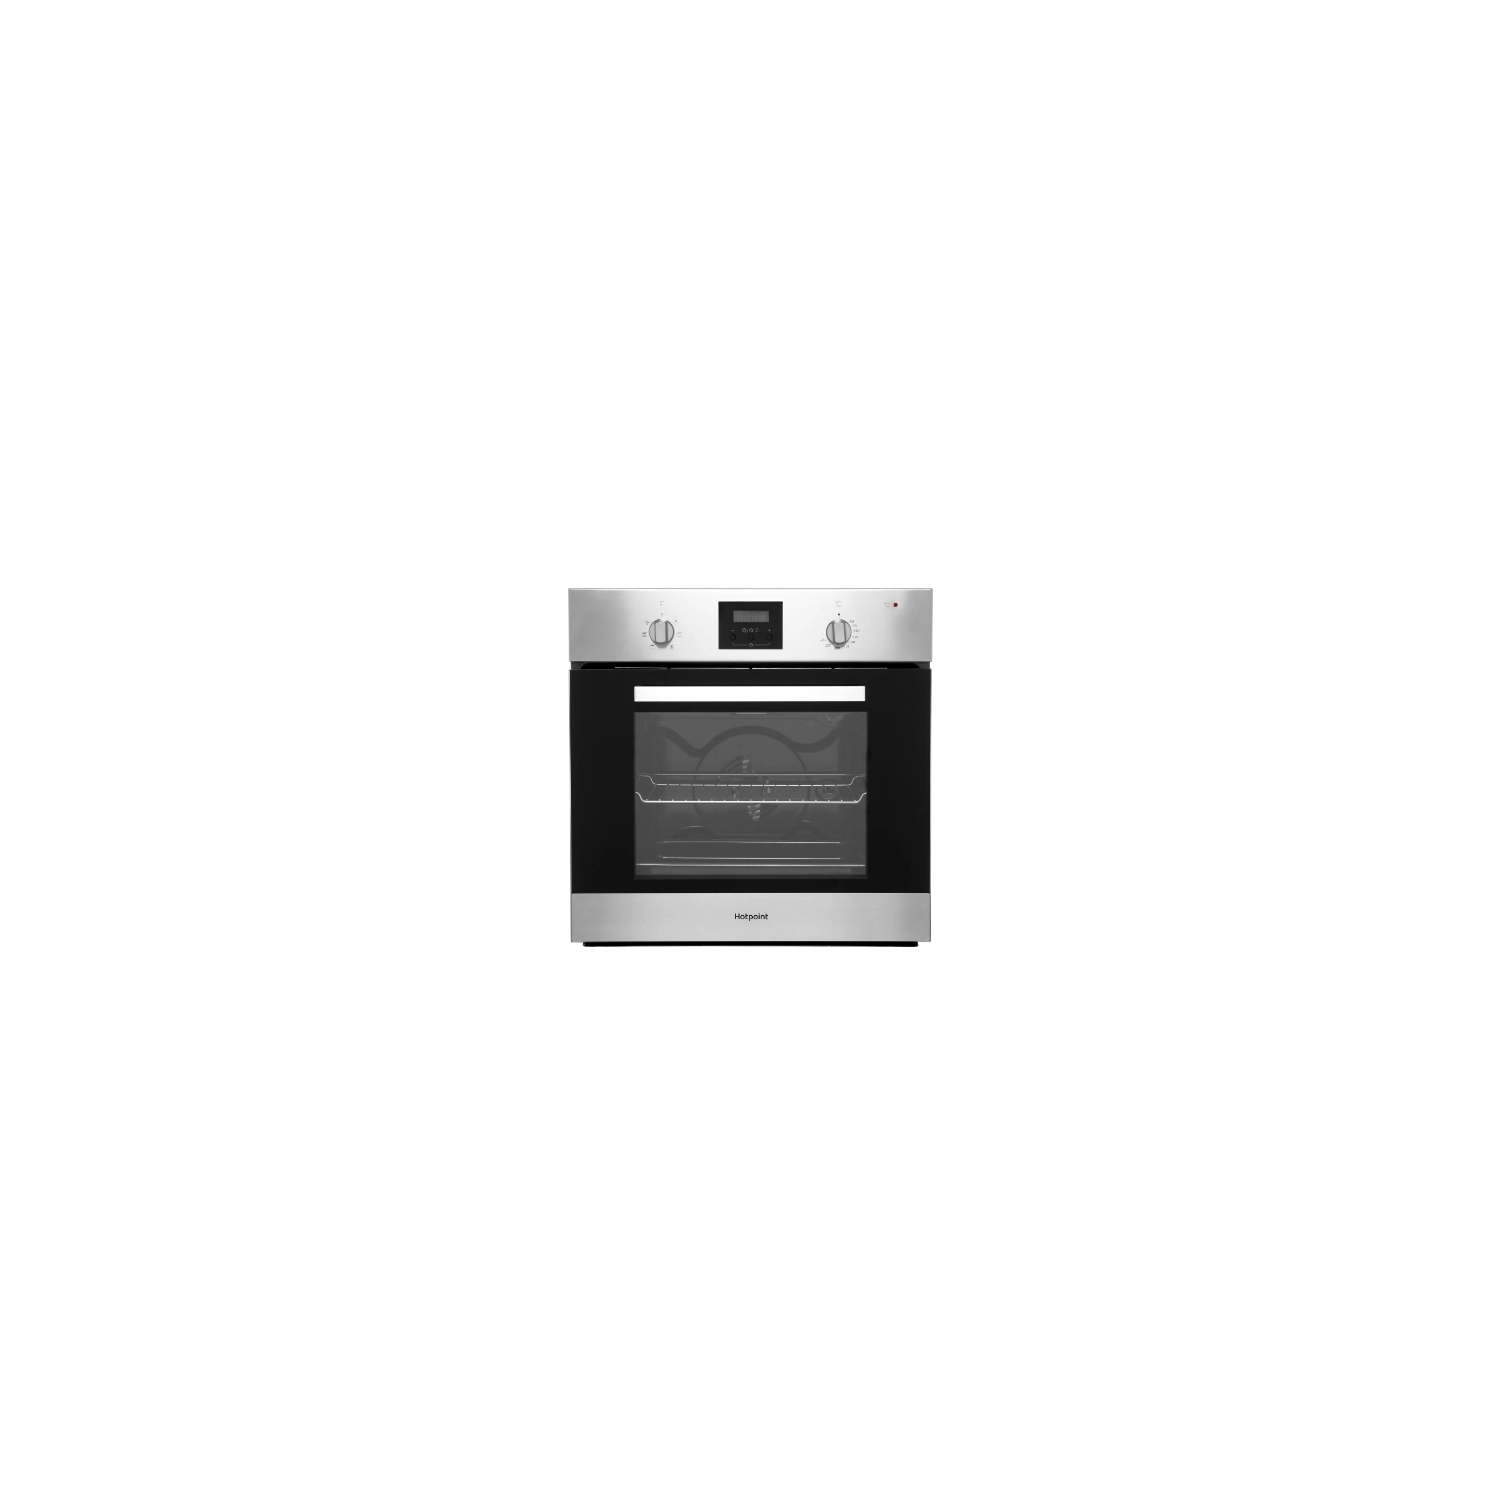 Hotpoint Built In Electric Single Oven - Stainless Steel - A Rated - 0